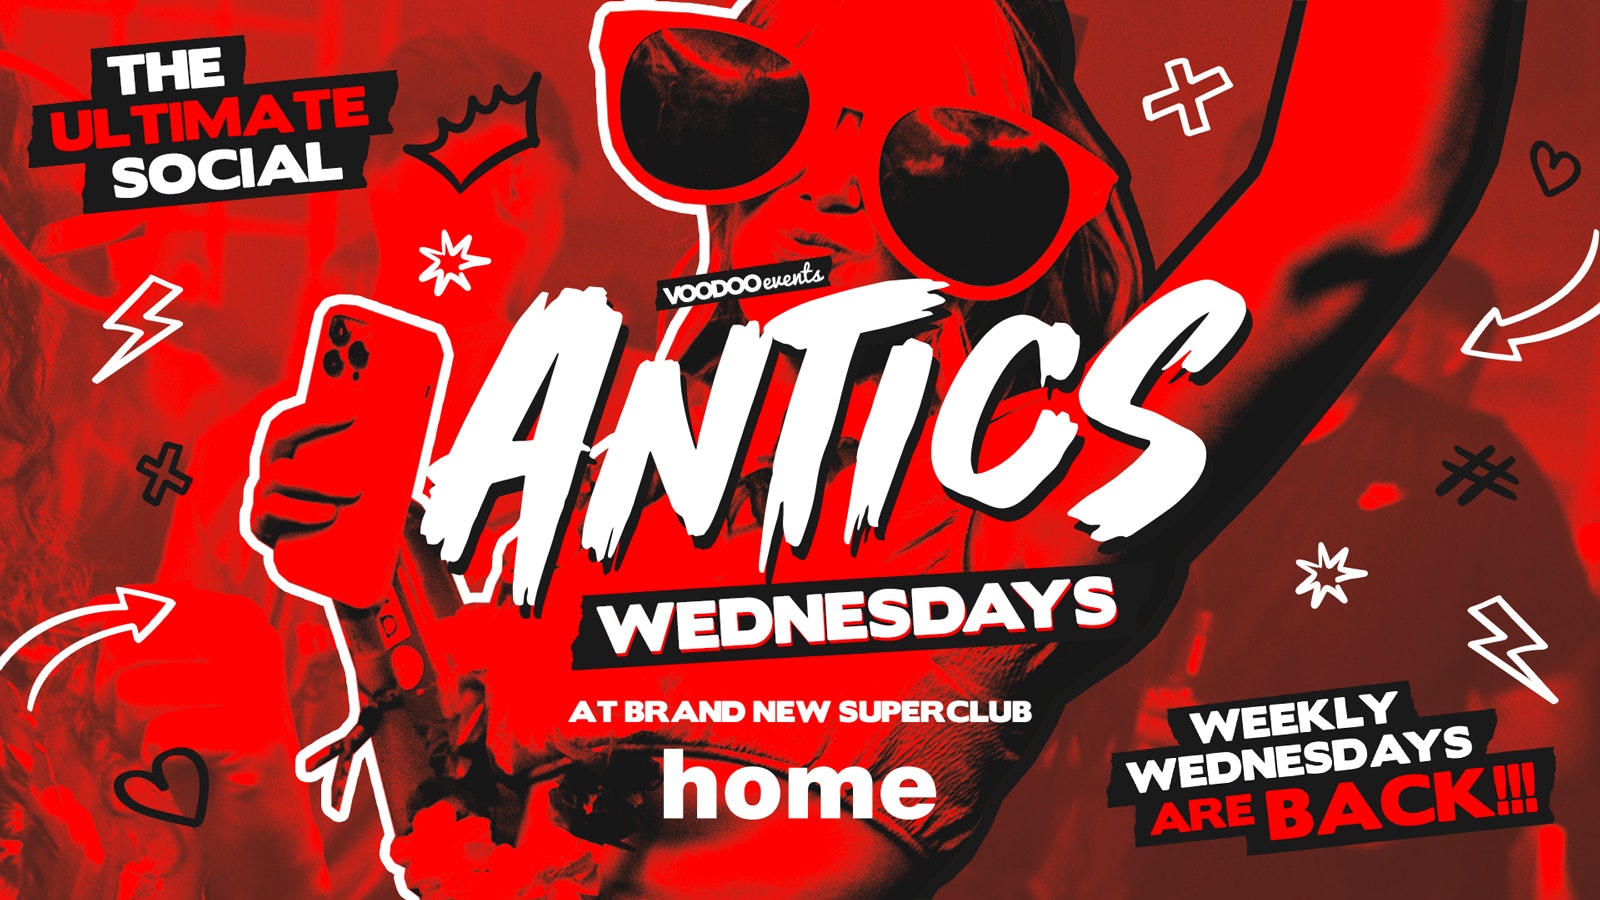 Antics @ THE BRAND NEW SUPER CLUB HOME – Wednesday 1st May